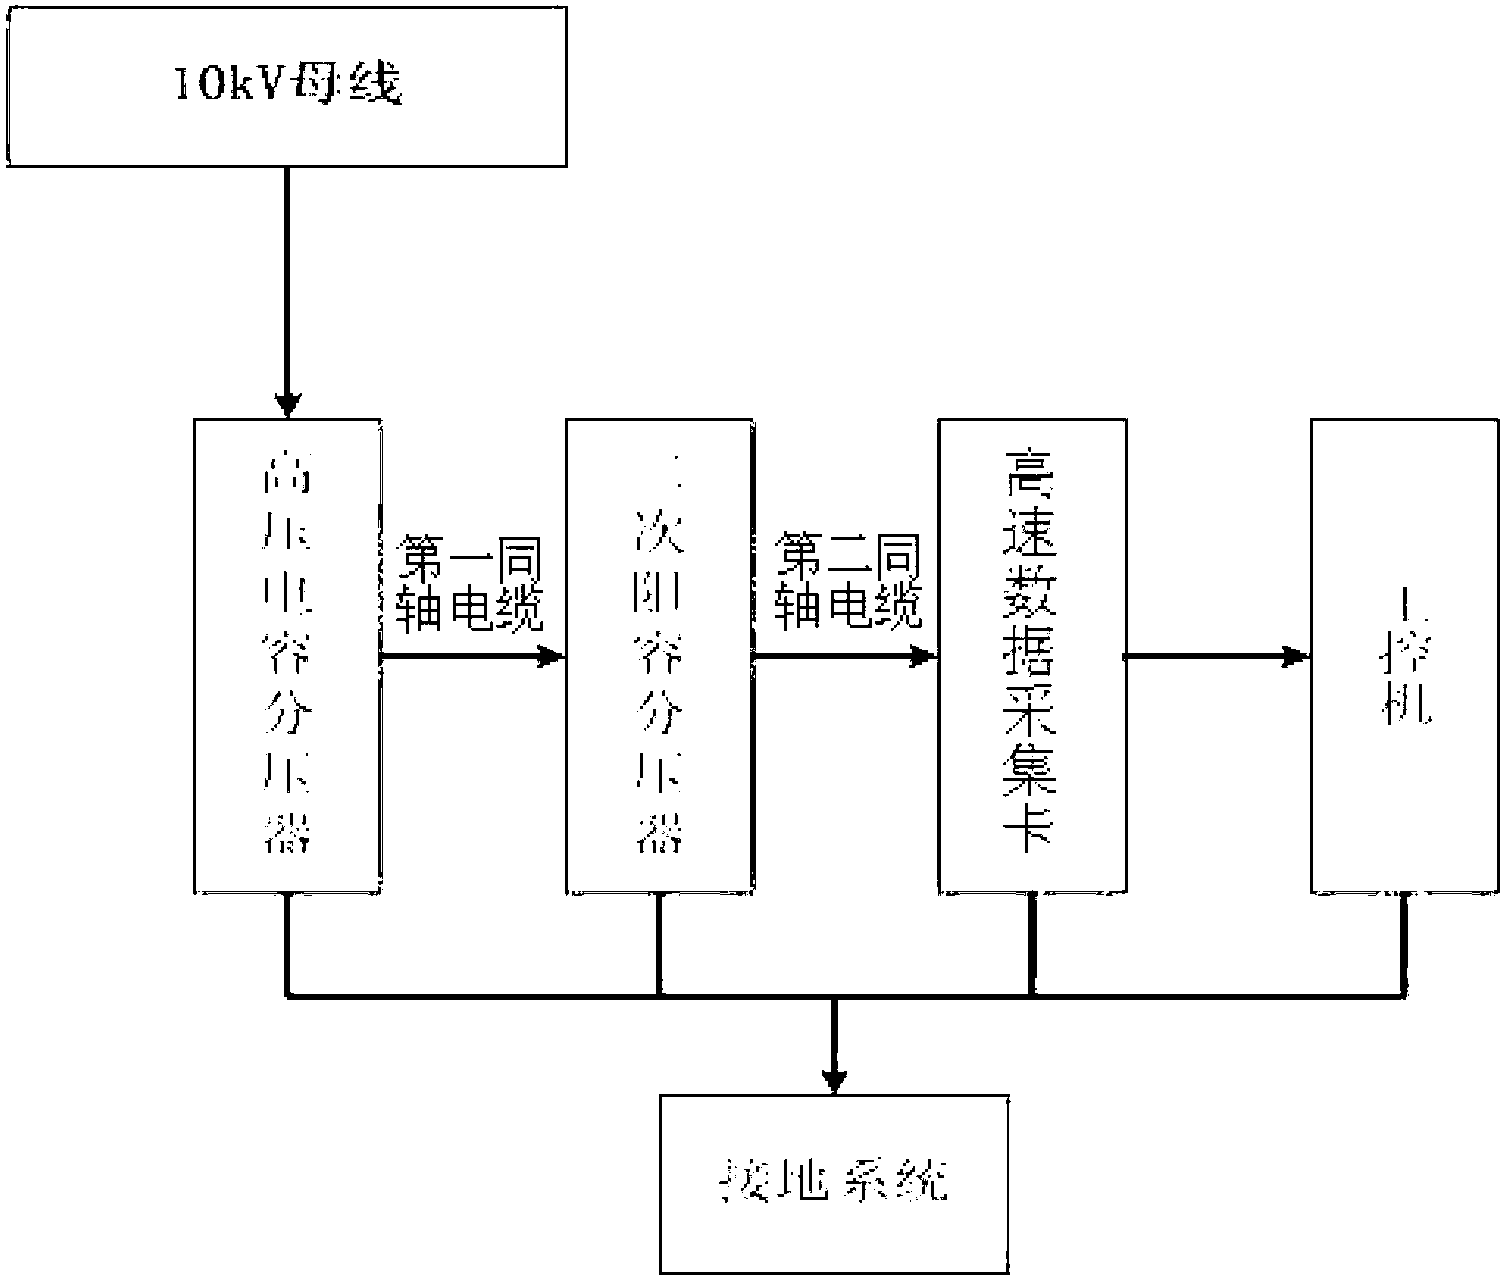 Voltage online monitoring device for power system